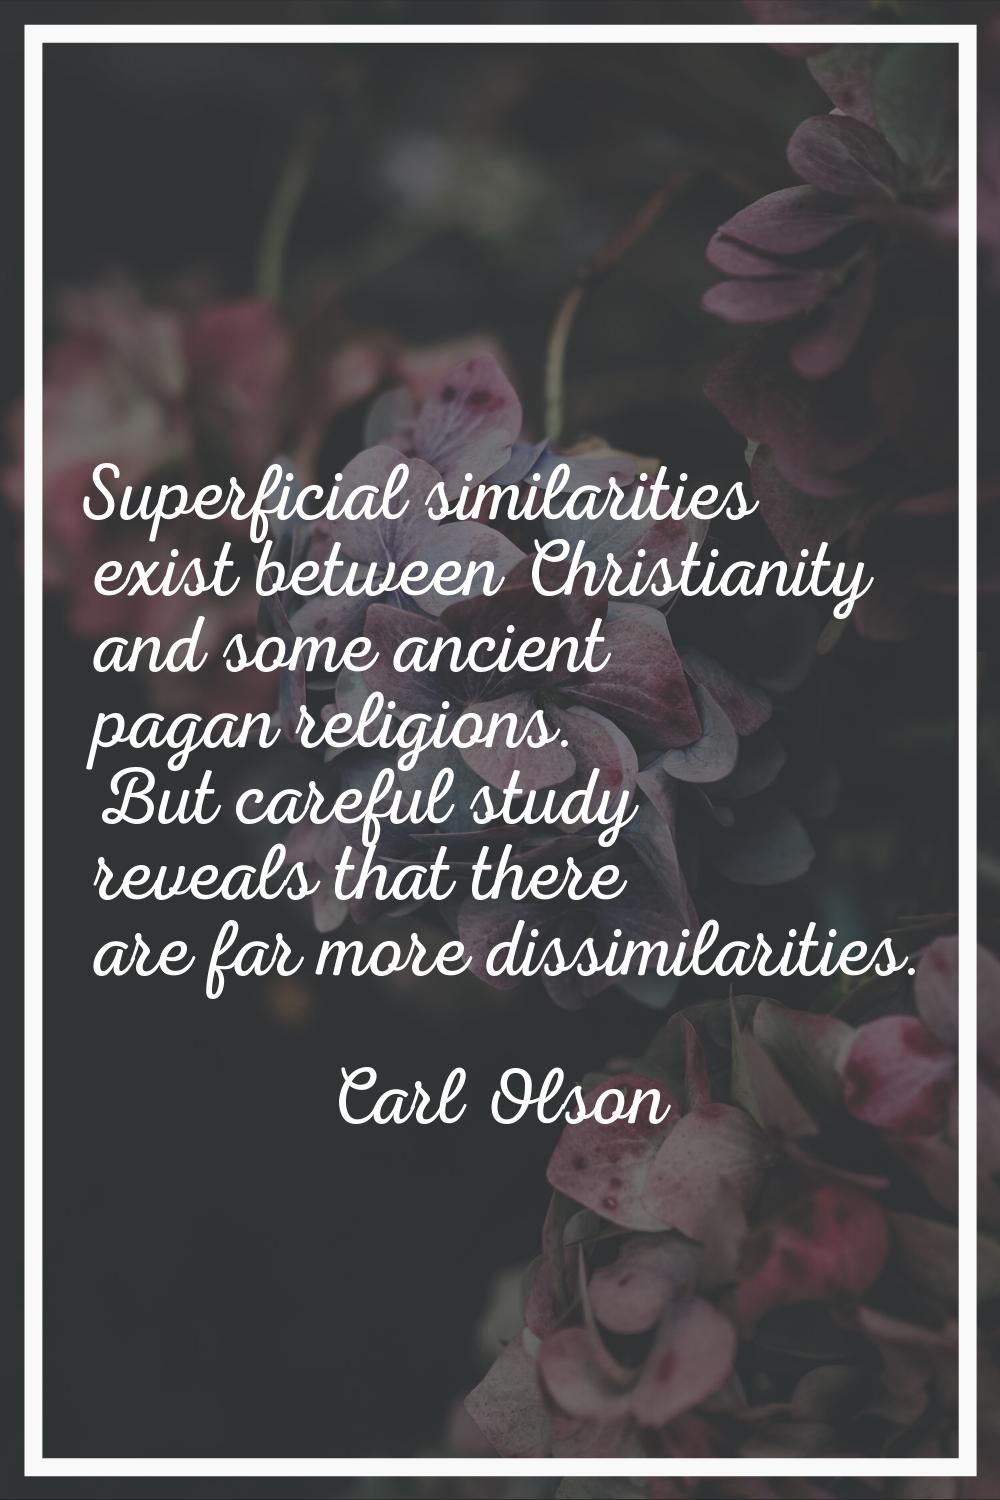 Superficial similarities exist between Christianity and some ancient pagan religions. But careful s